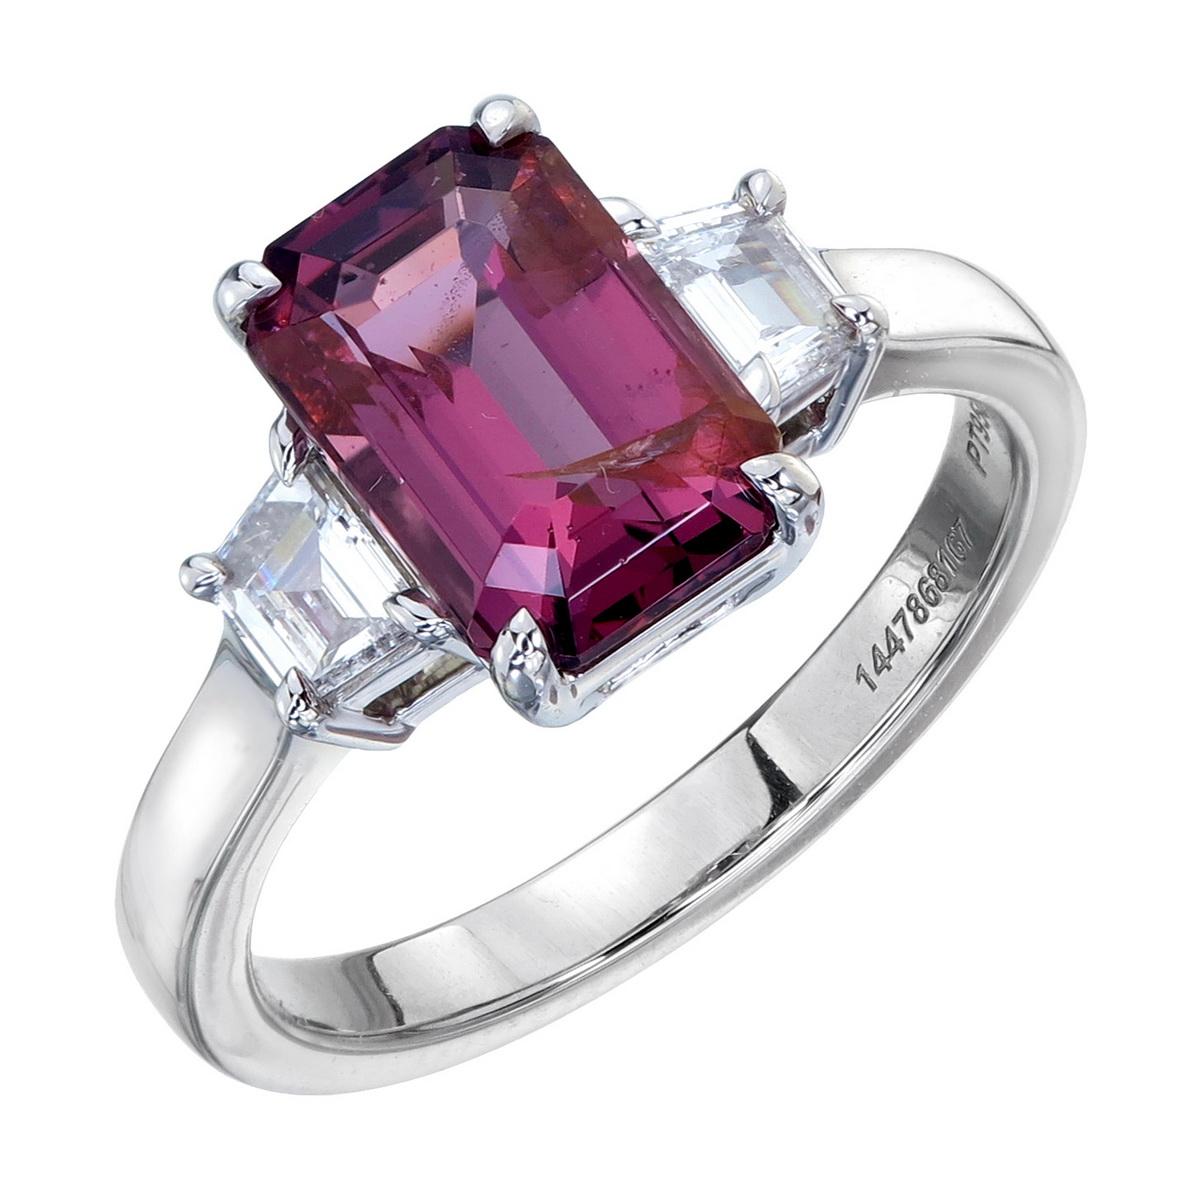 Orloff of Denmark's own; 'Amaranth Treasure'
This wonderful three-stone ring features a 2.52 carat purplish pink spinel along with two VVS2, F-Colored trapezoid diamonds on each side.
The glistening white shine of the diamonds bring a robust